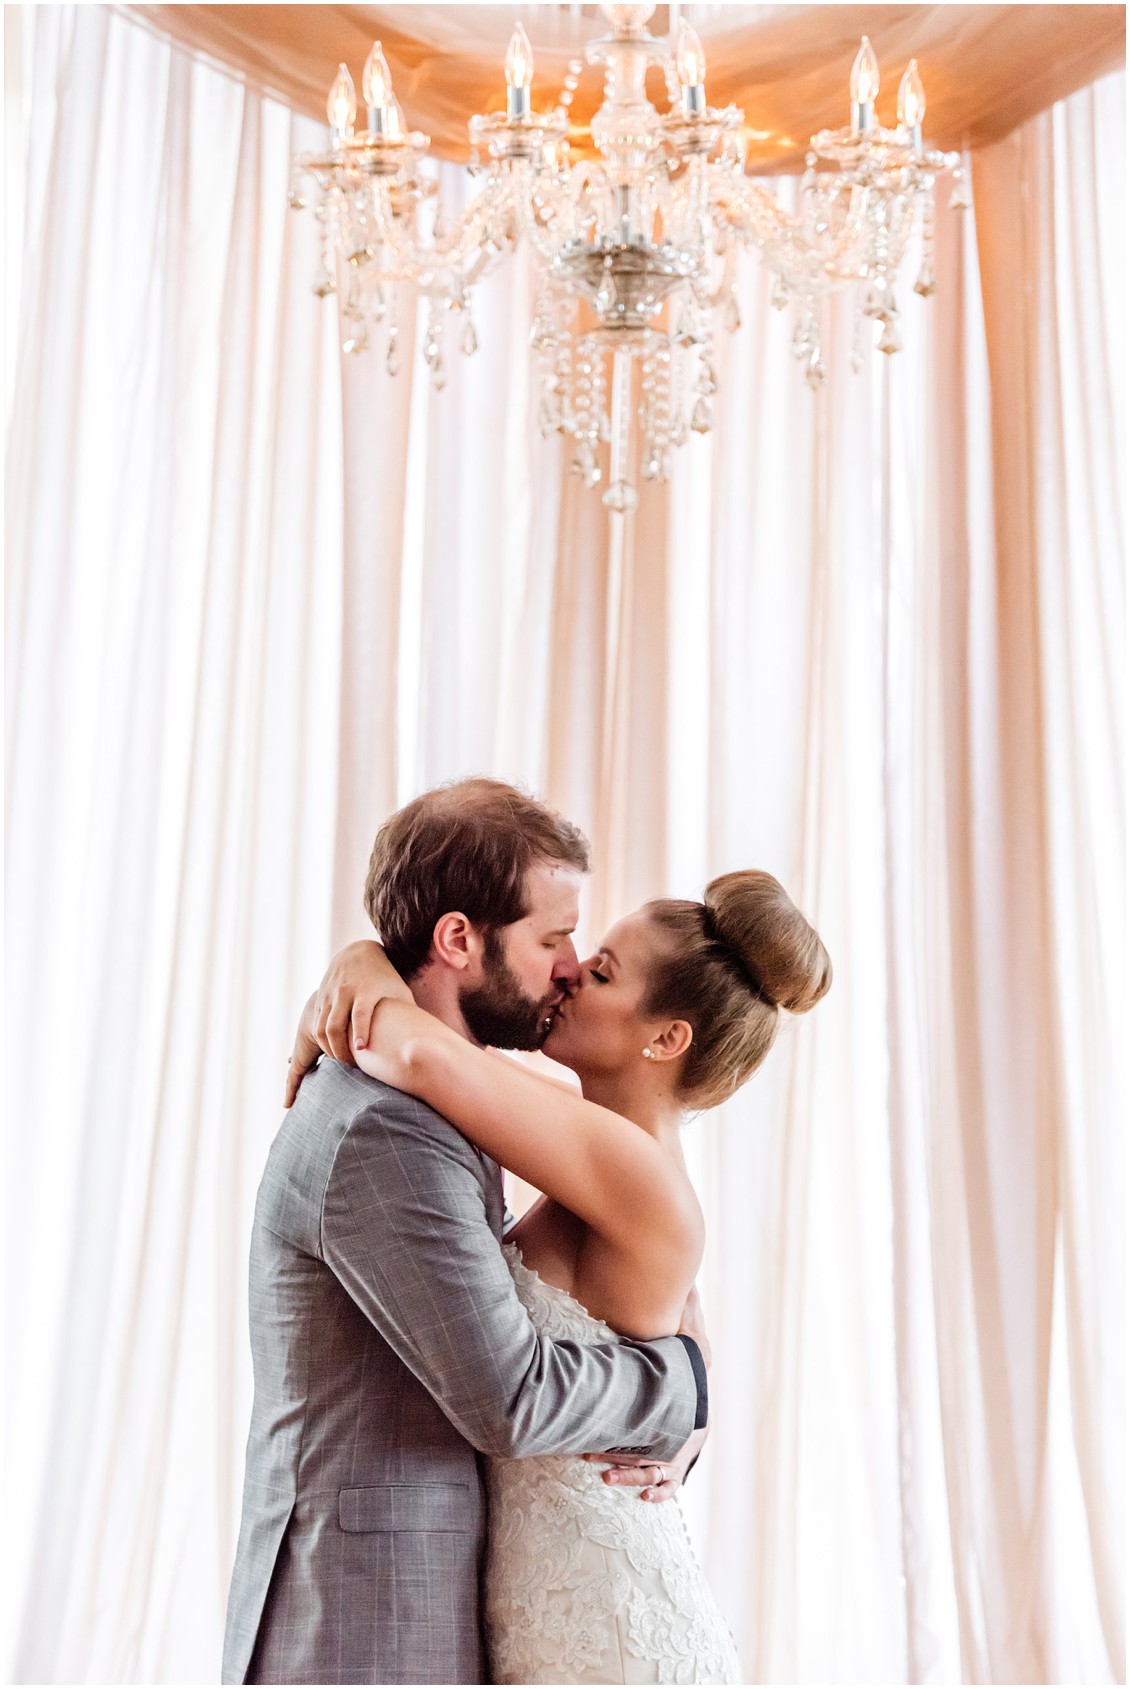 Large crystal chandelier over bride and groom, kissing. | My Eastern Shore Wedding | 